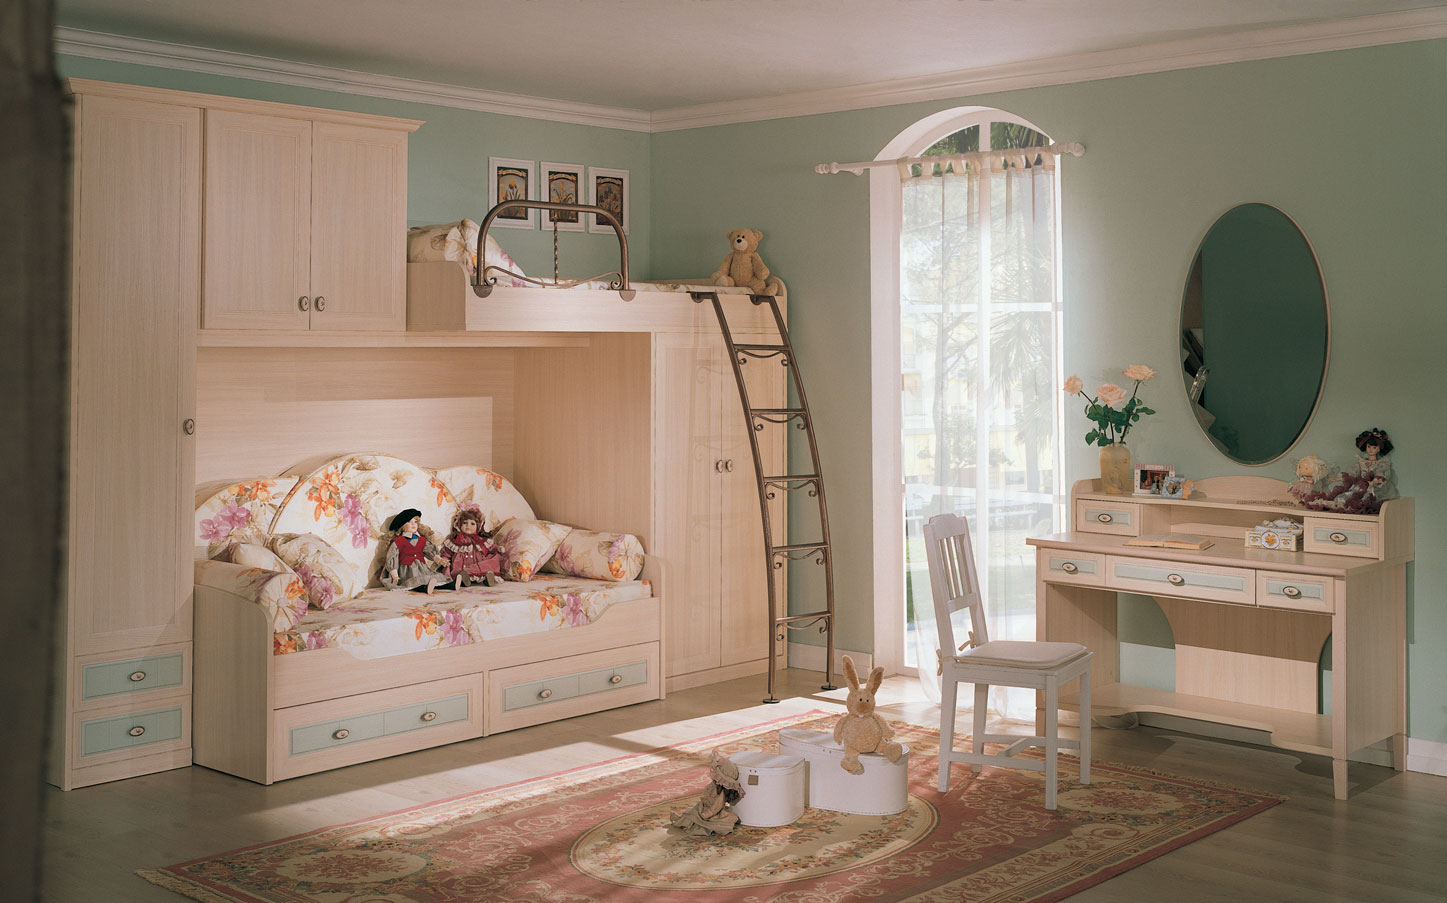 Wooden Furnitures Room Inspiring Wooden Furniture In Kid Room Ideas With Bunk Beds Combined With Cupboards Completed With Desk And Oval Mirror Also Furnished With White Chair On Rug Kids Room 15 Trendy Kids Room Ideas For The Bold Modern Home